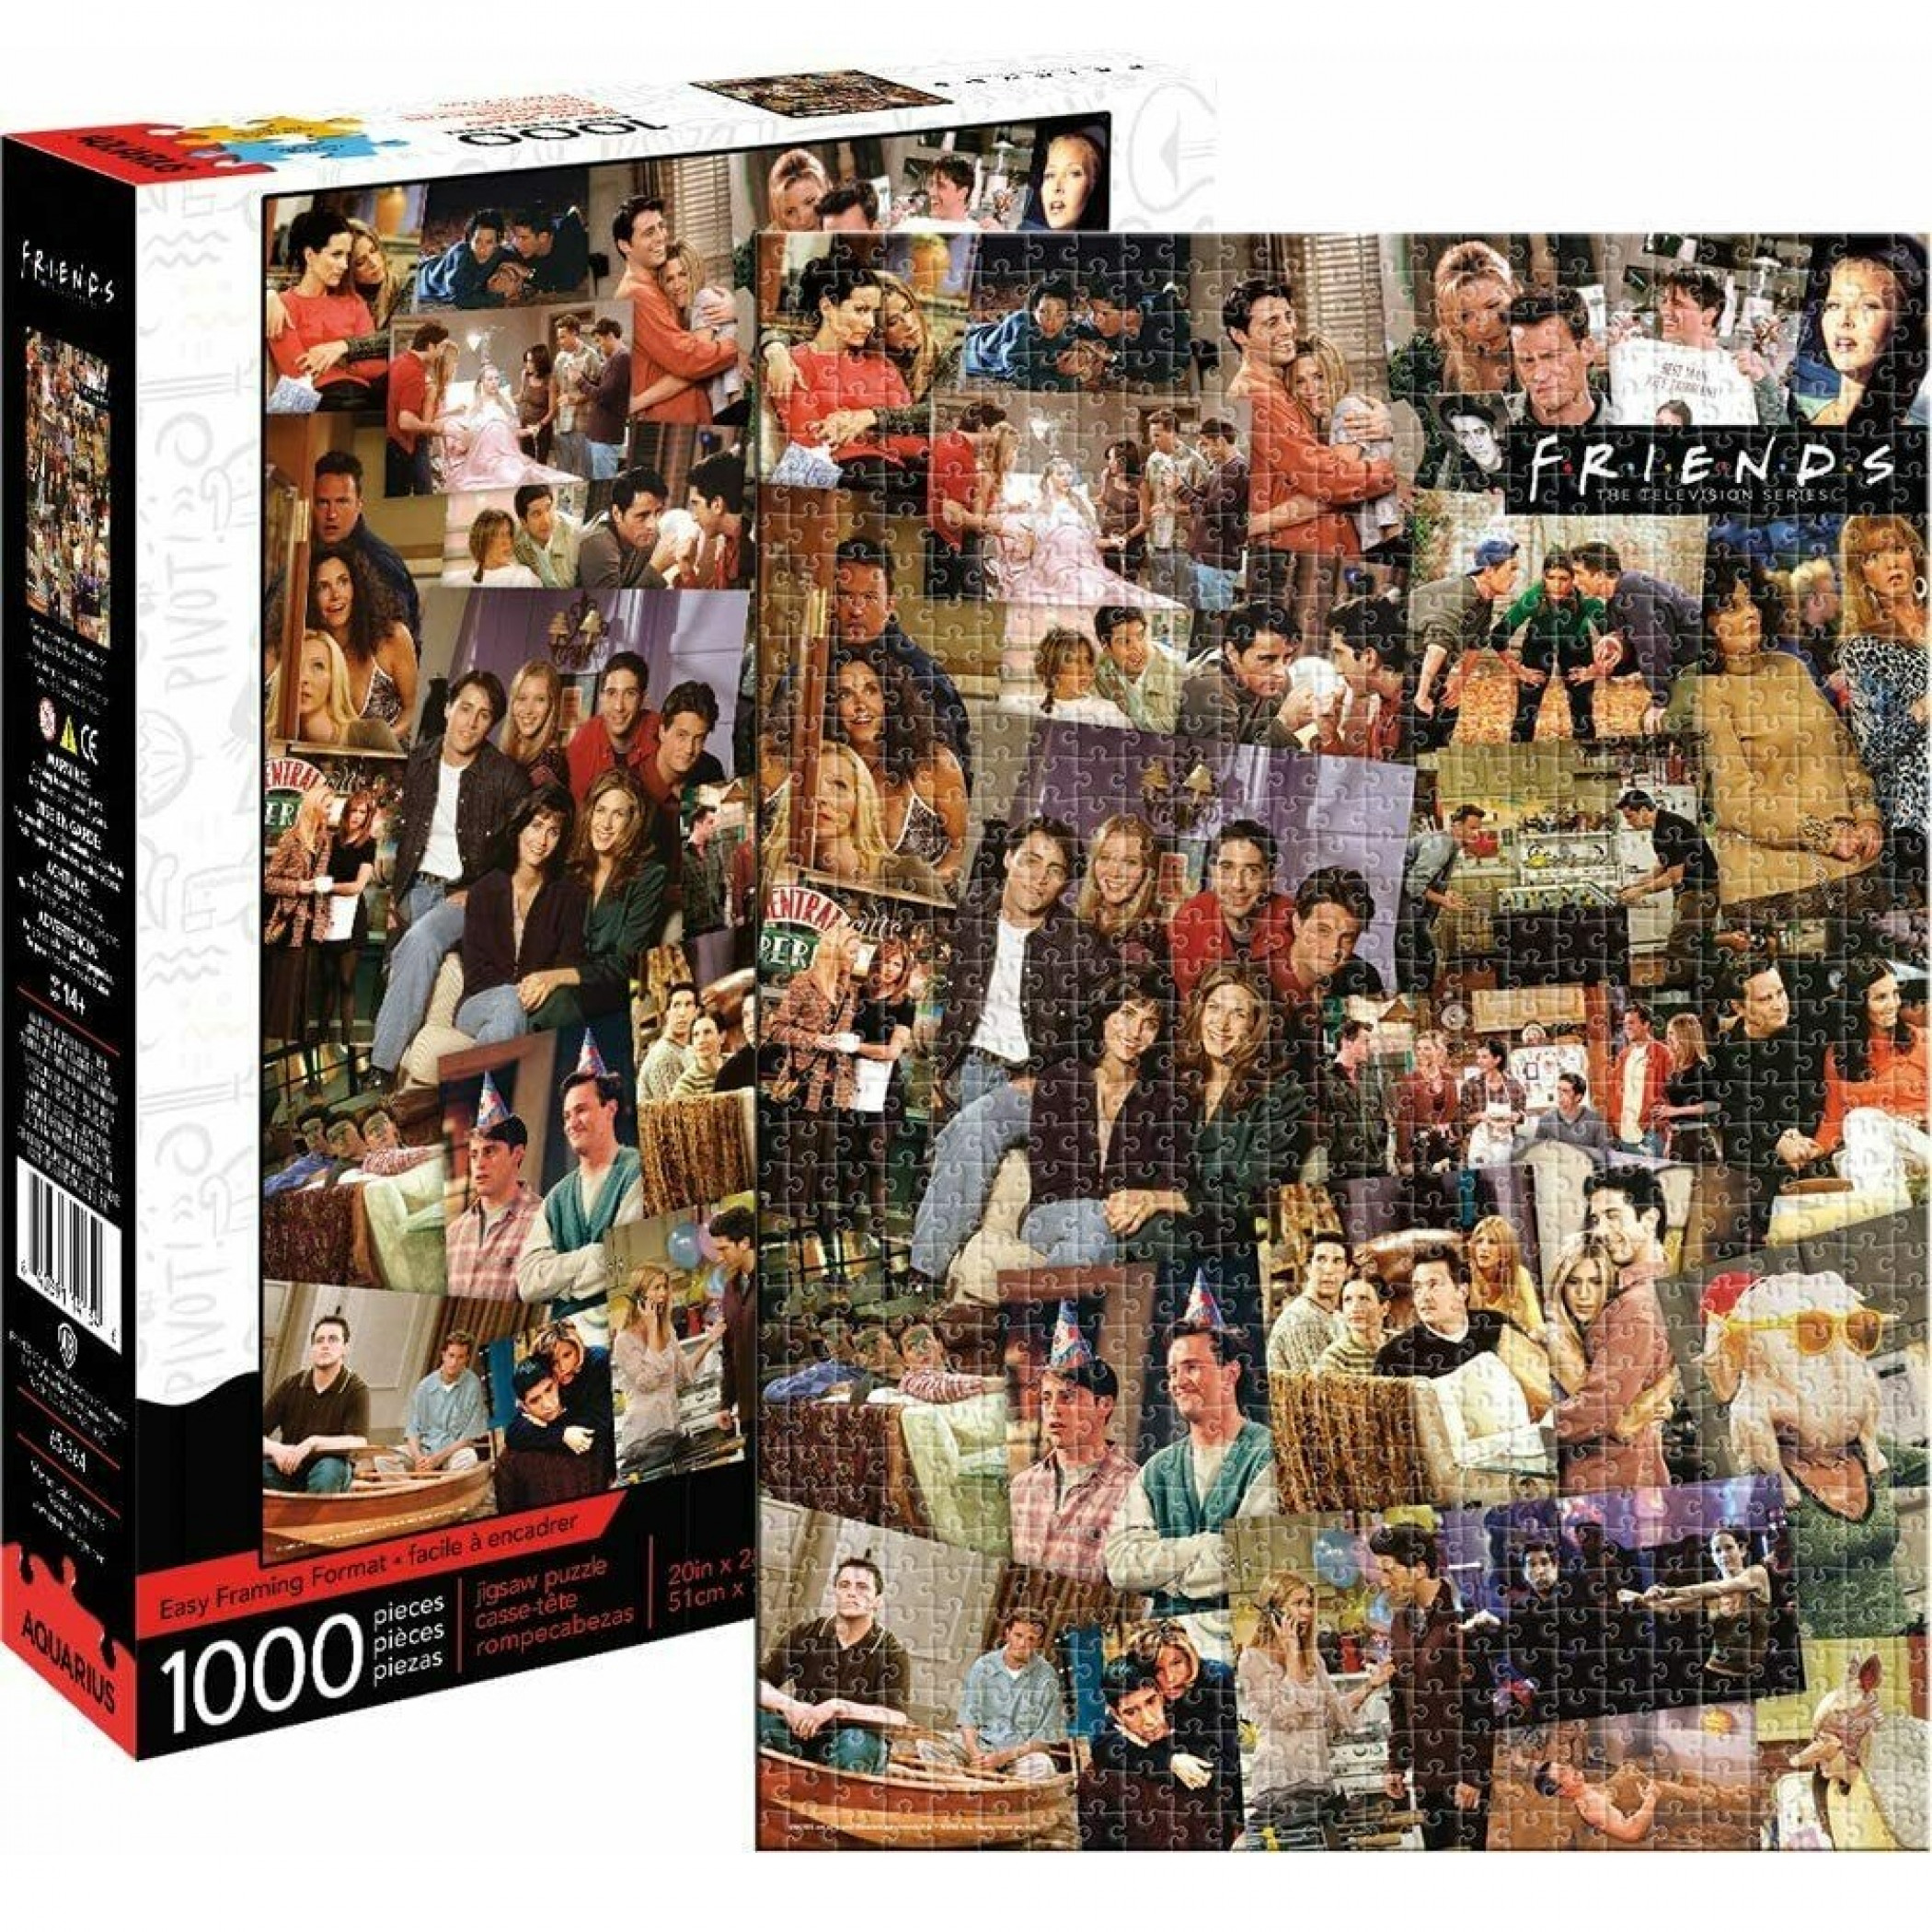 Officially Licensed Friends TV Show Collage Jigsaw Puzzle 1000 Pieces 